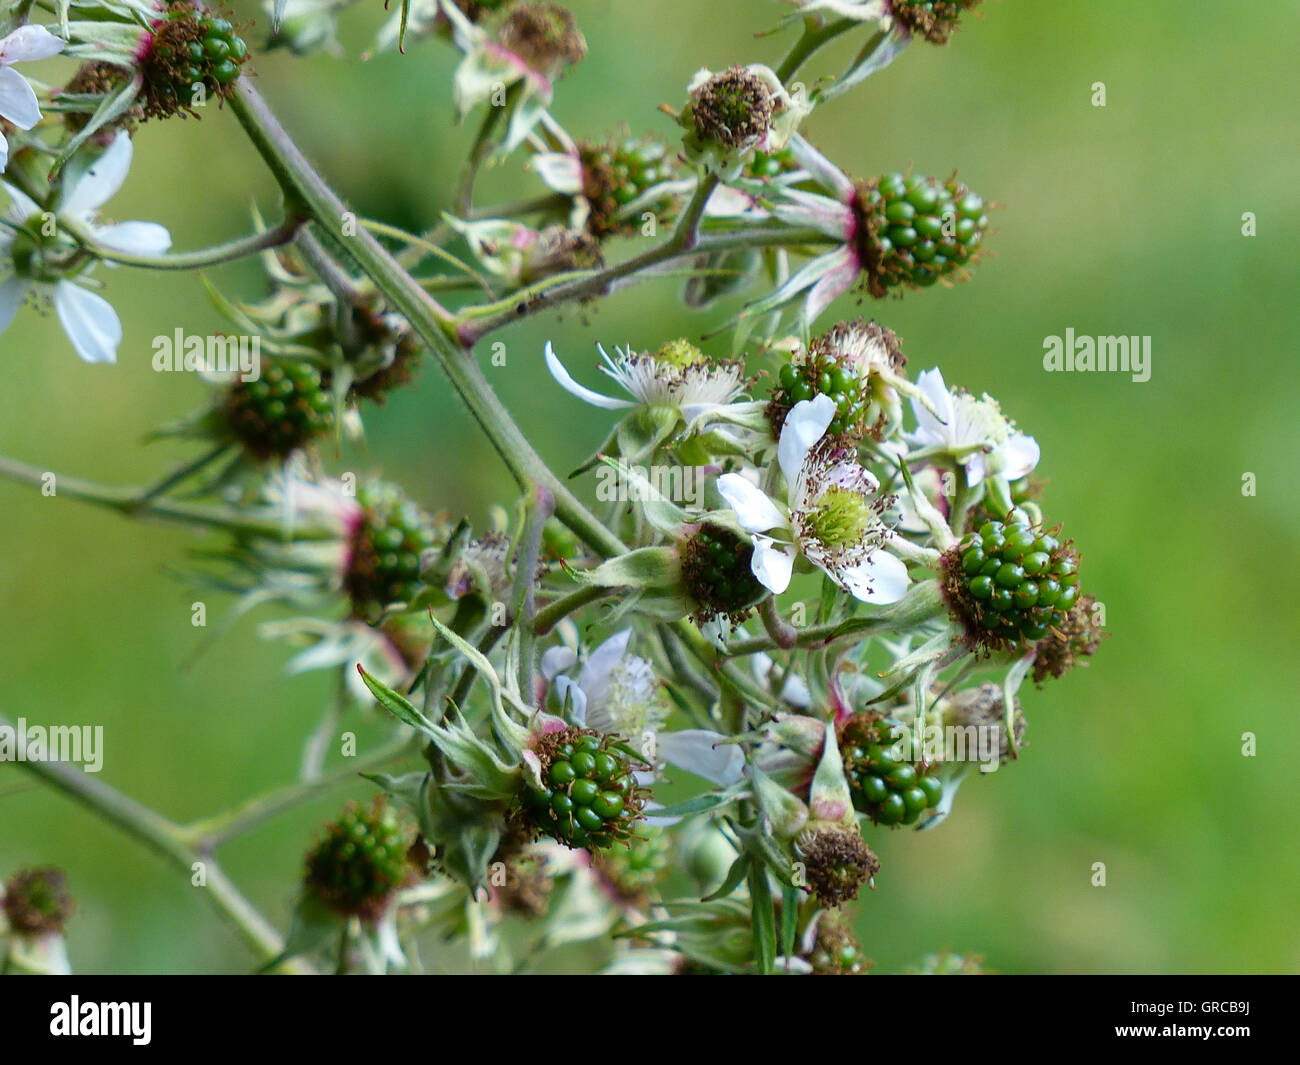 Bramble Bush With Green Unripe Berries And Blossoms Stock Photo